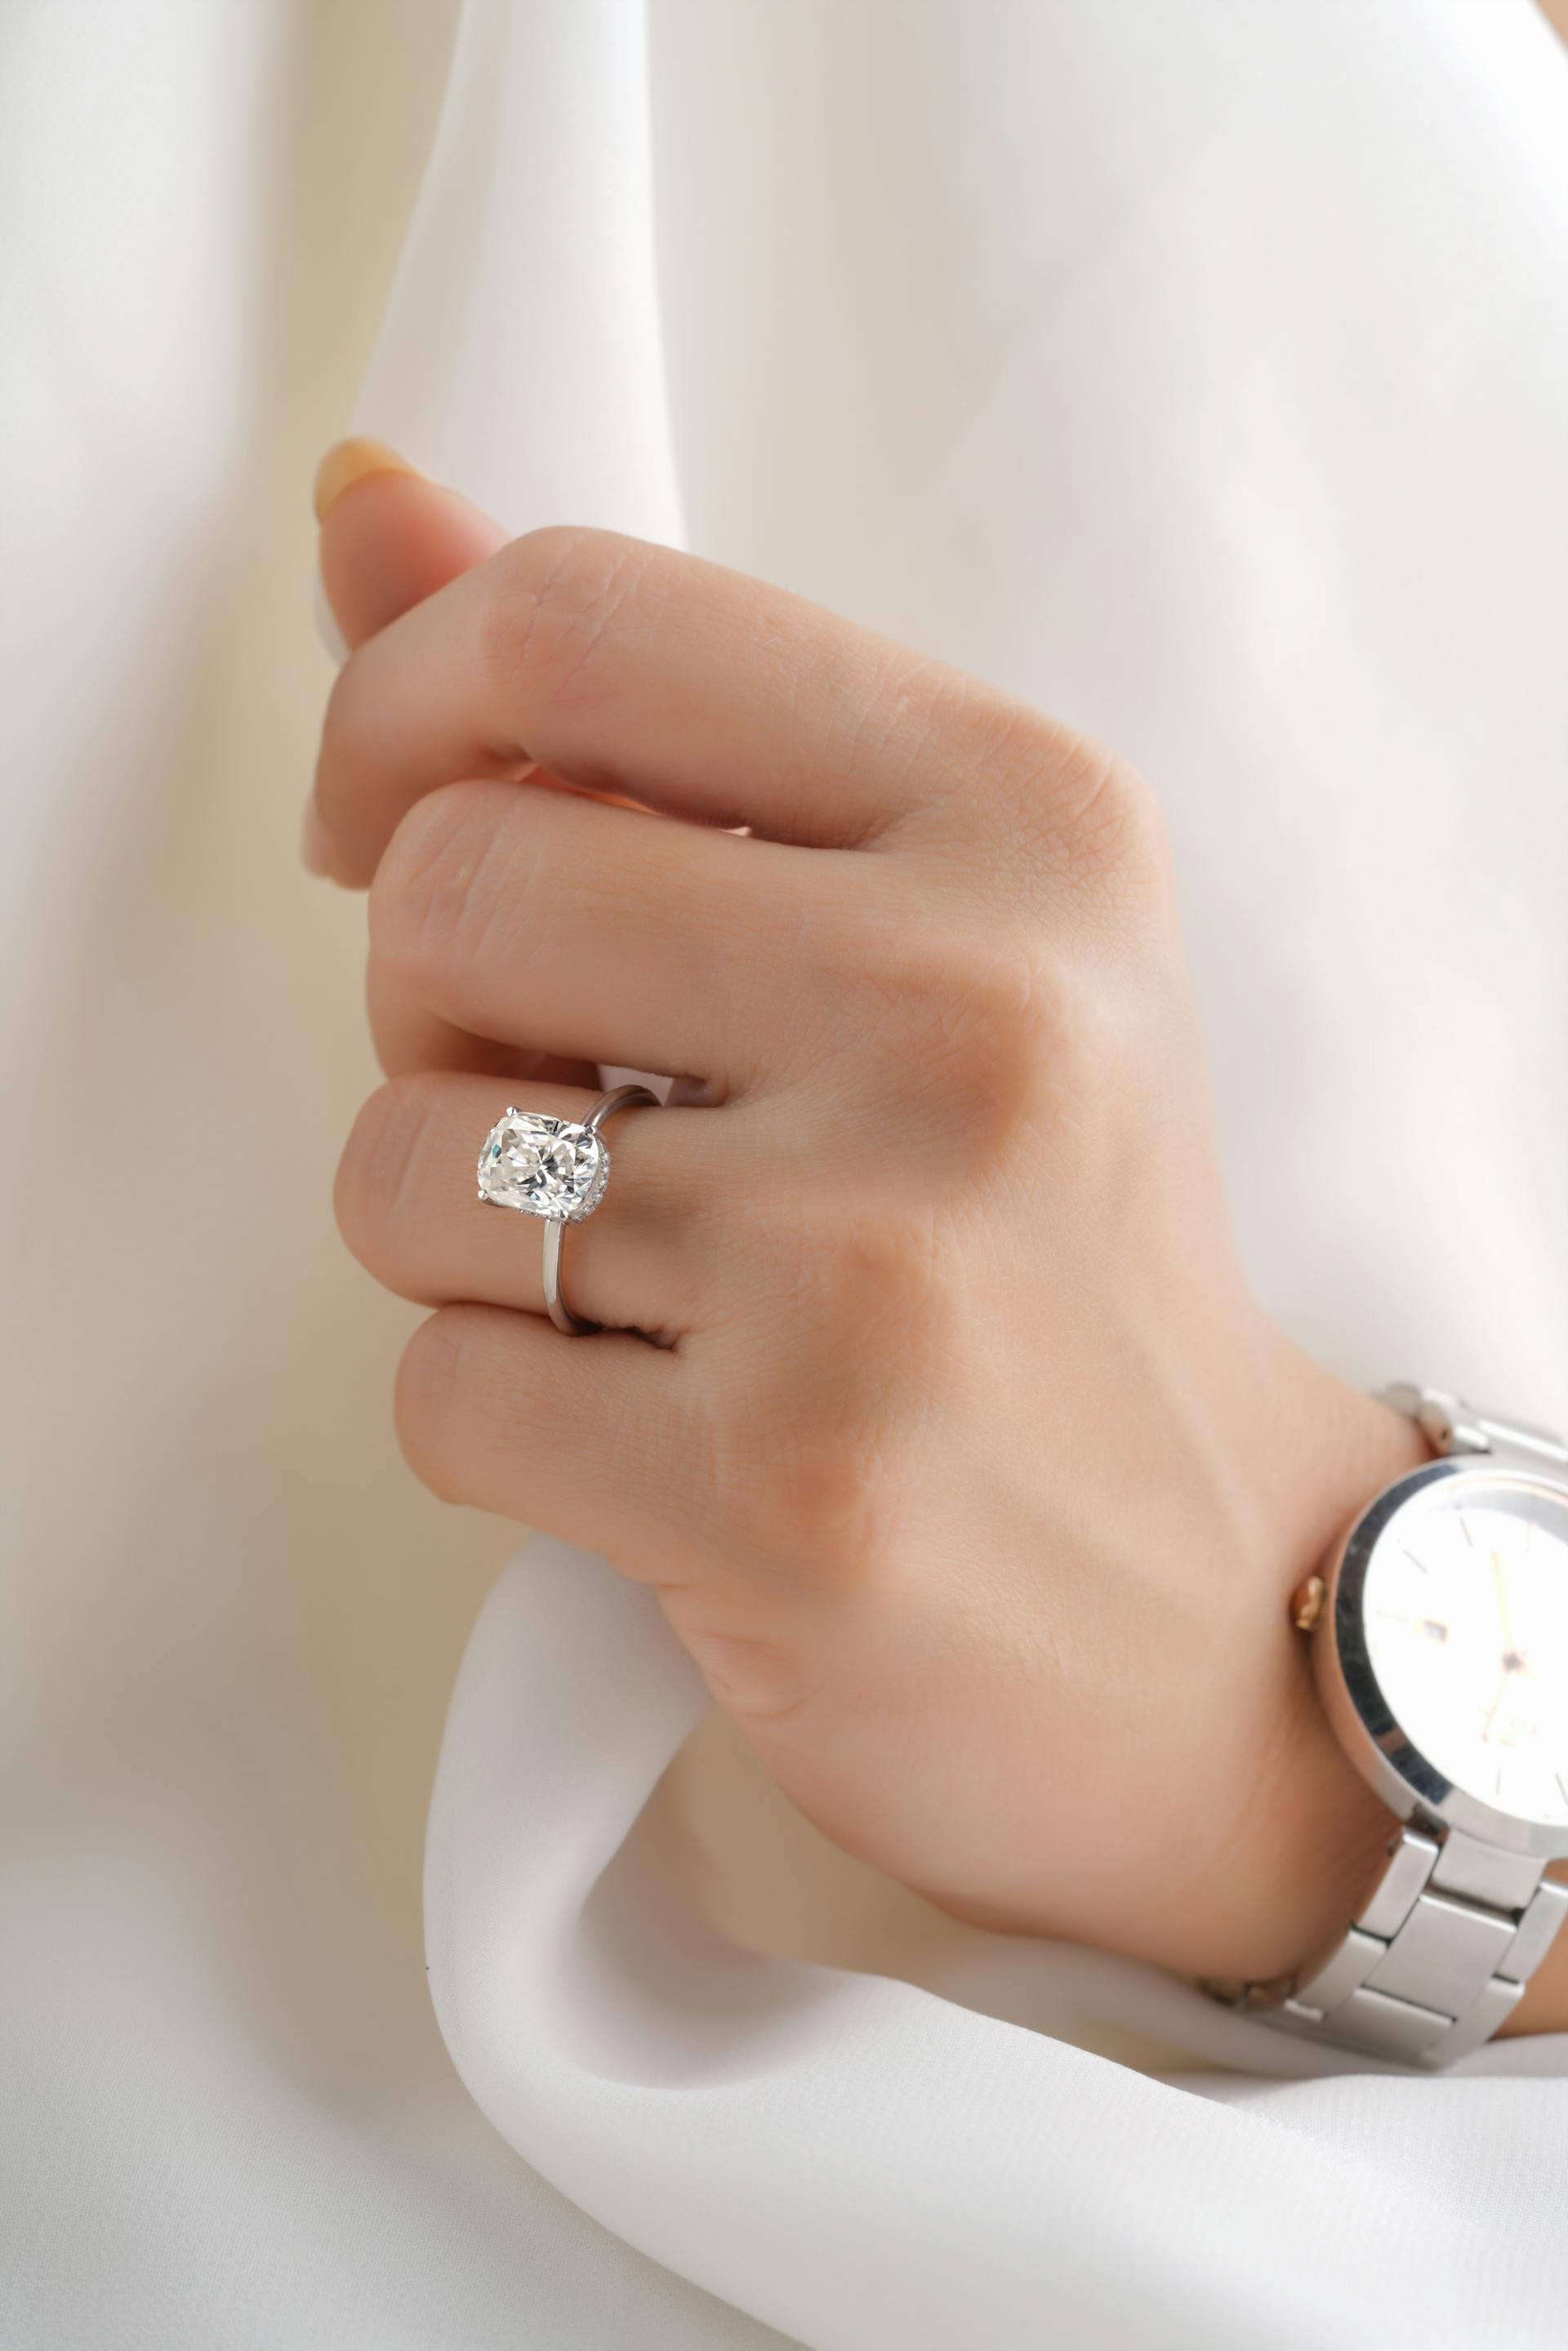 A person wearing an engagement ring | Source: Pexels